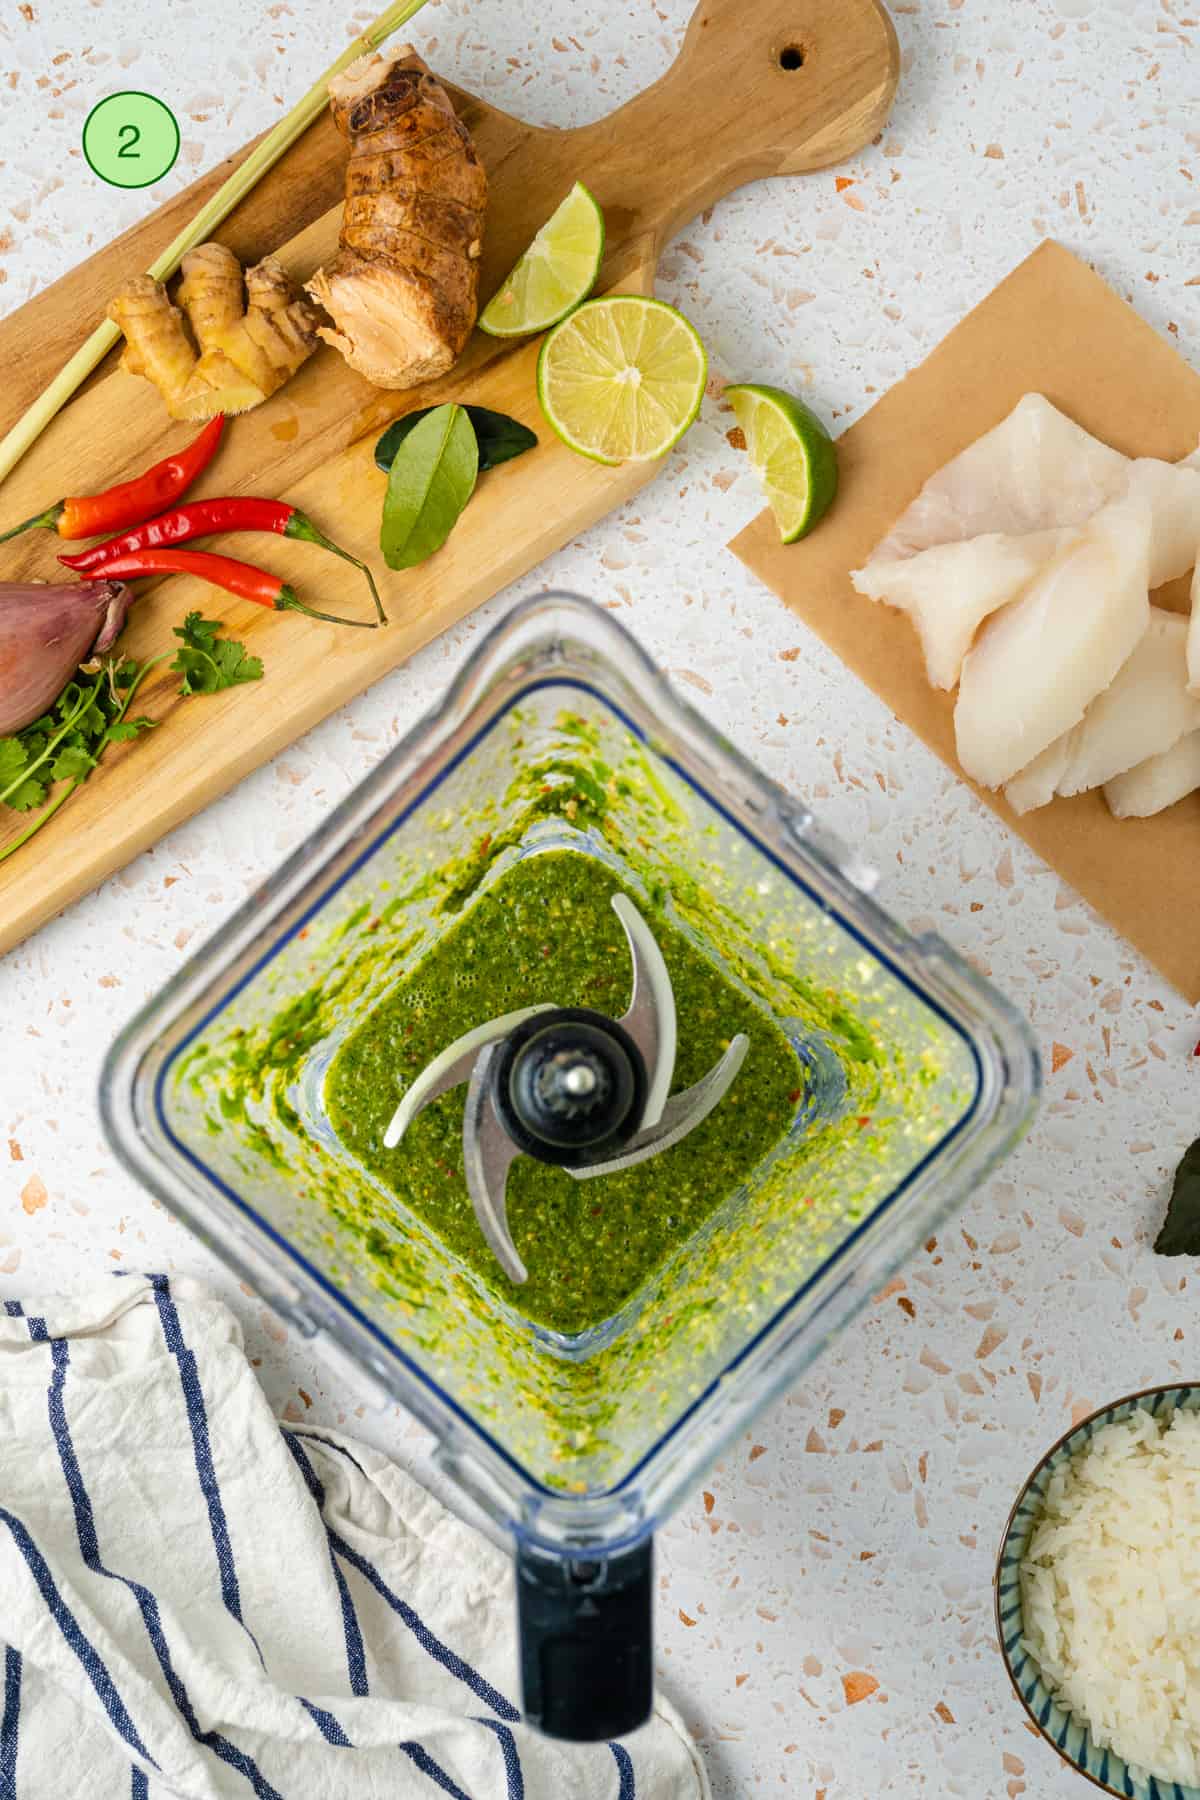 Blend the green curry paste until it is will blended and mixed together.